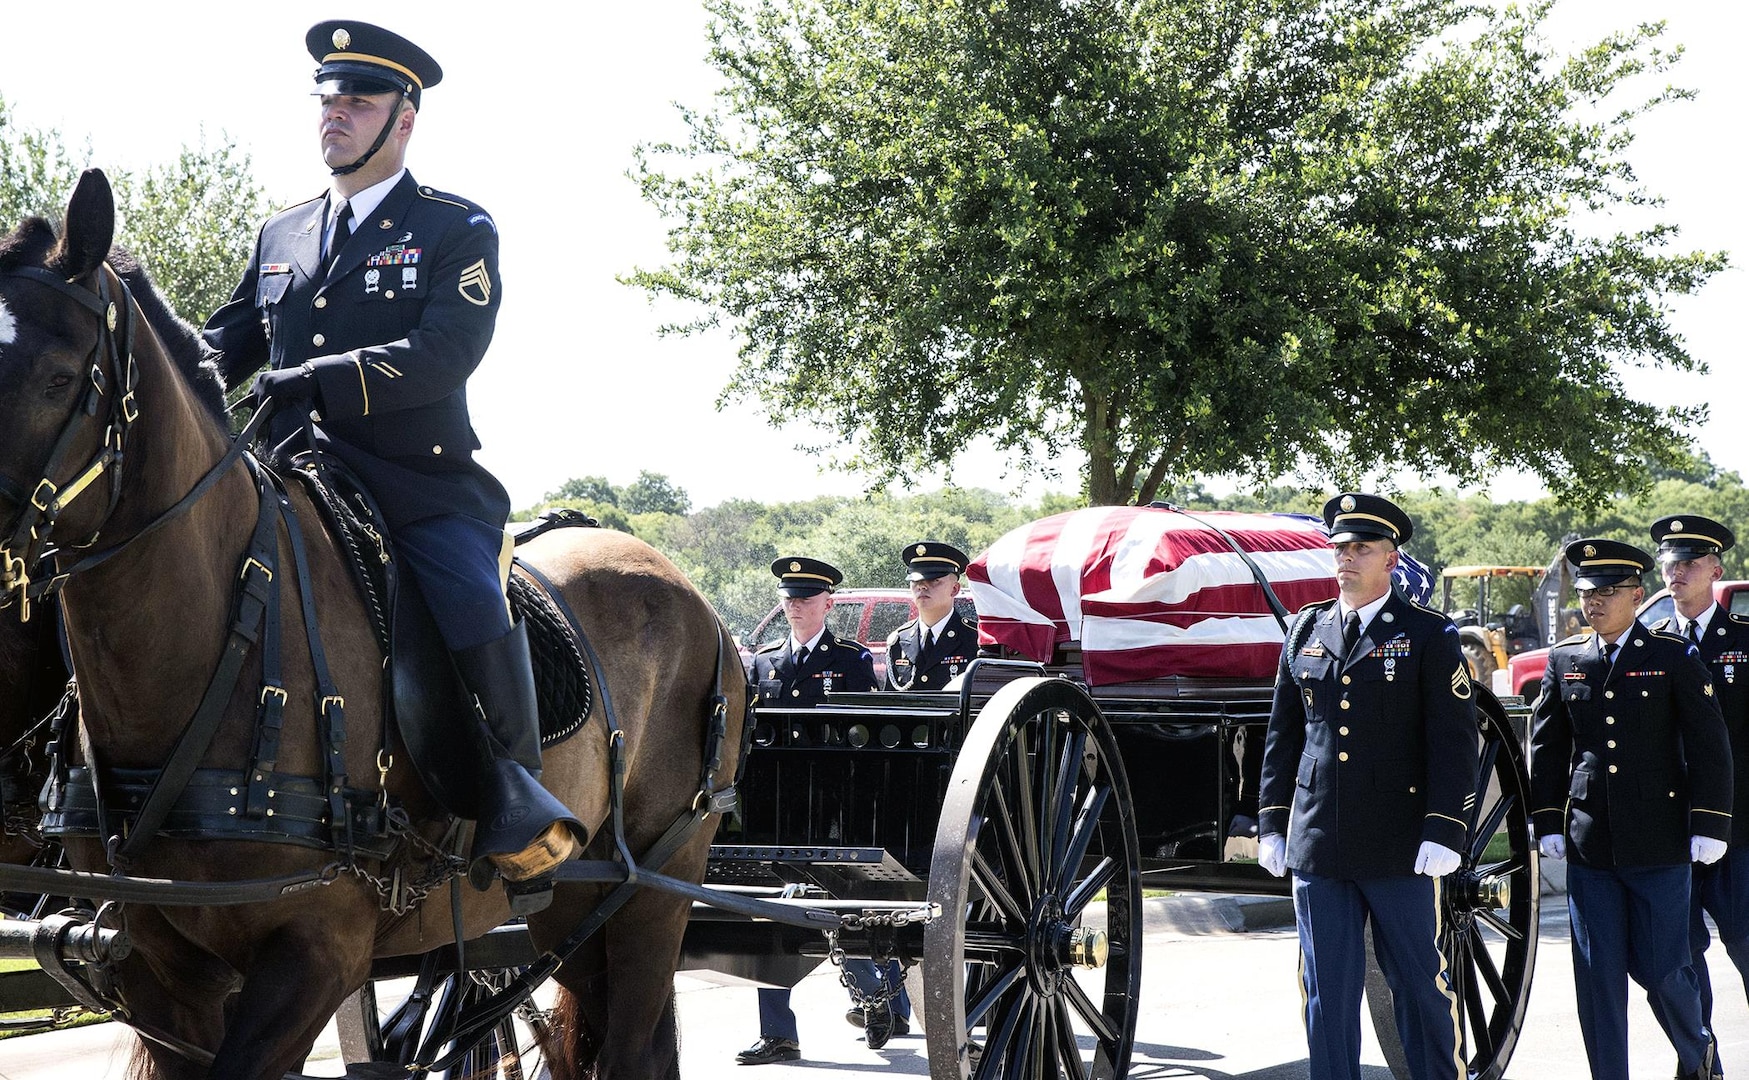 Members of the Joint Base San Antonio-Fort Sam Houston Honor Guard escort the caisson carrying the coffin with the remains of Army Cpl. Frank Sandoval to the assembly area at the Fort Sam Houston National Cemetery July 11.